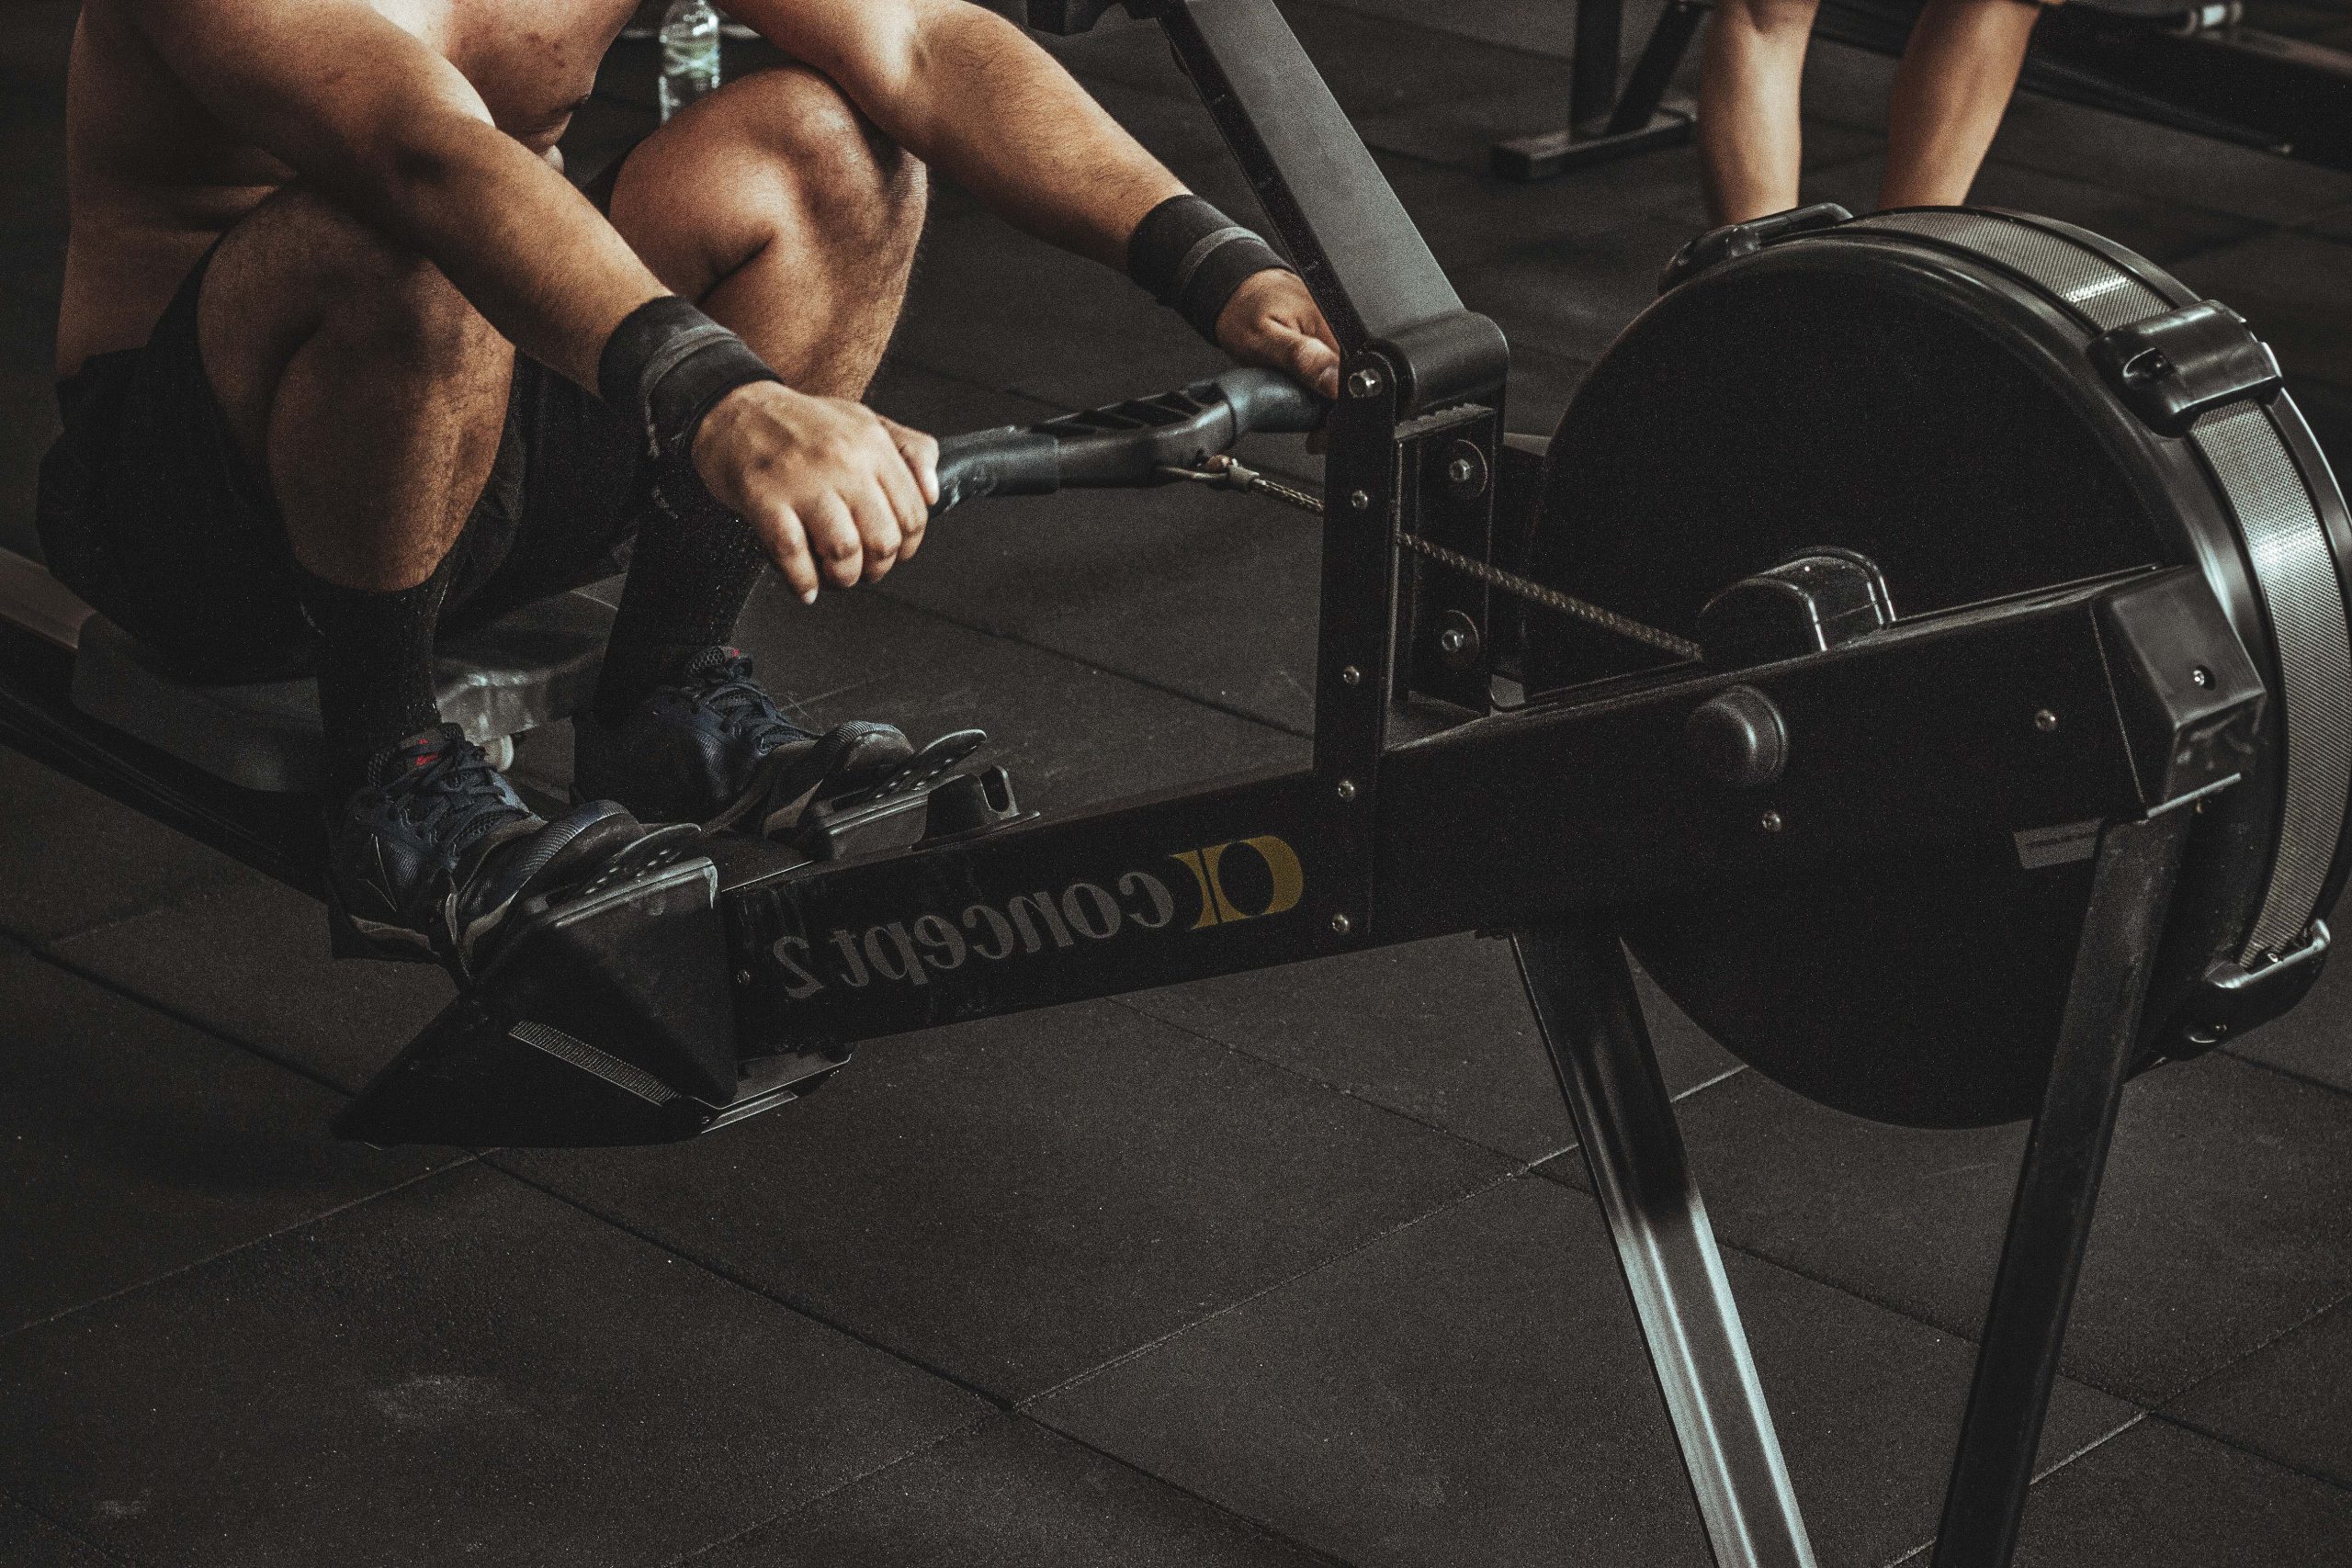 Rowing at home – what effects does training on an ergometer have?